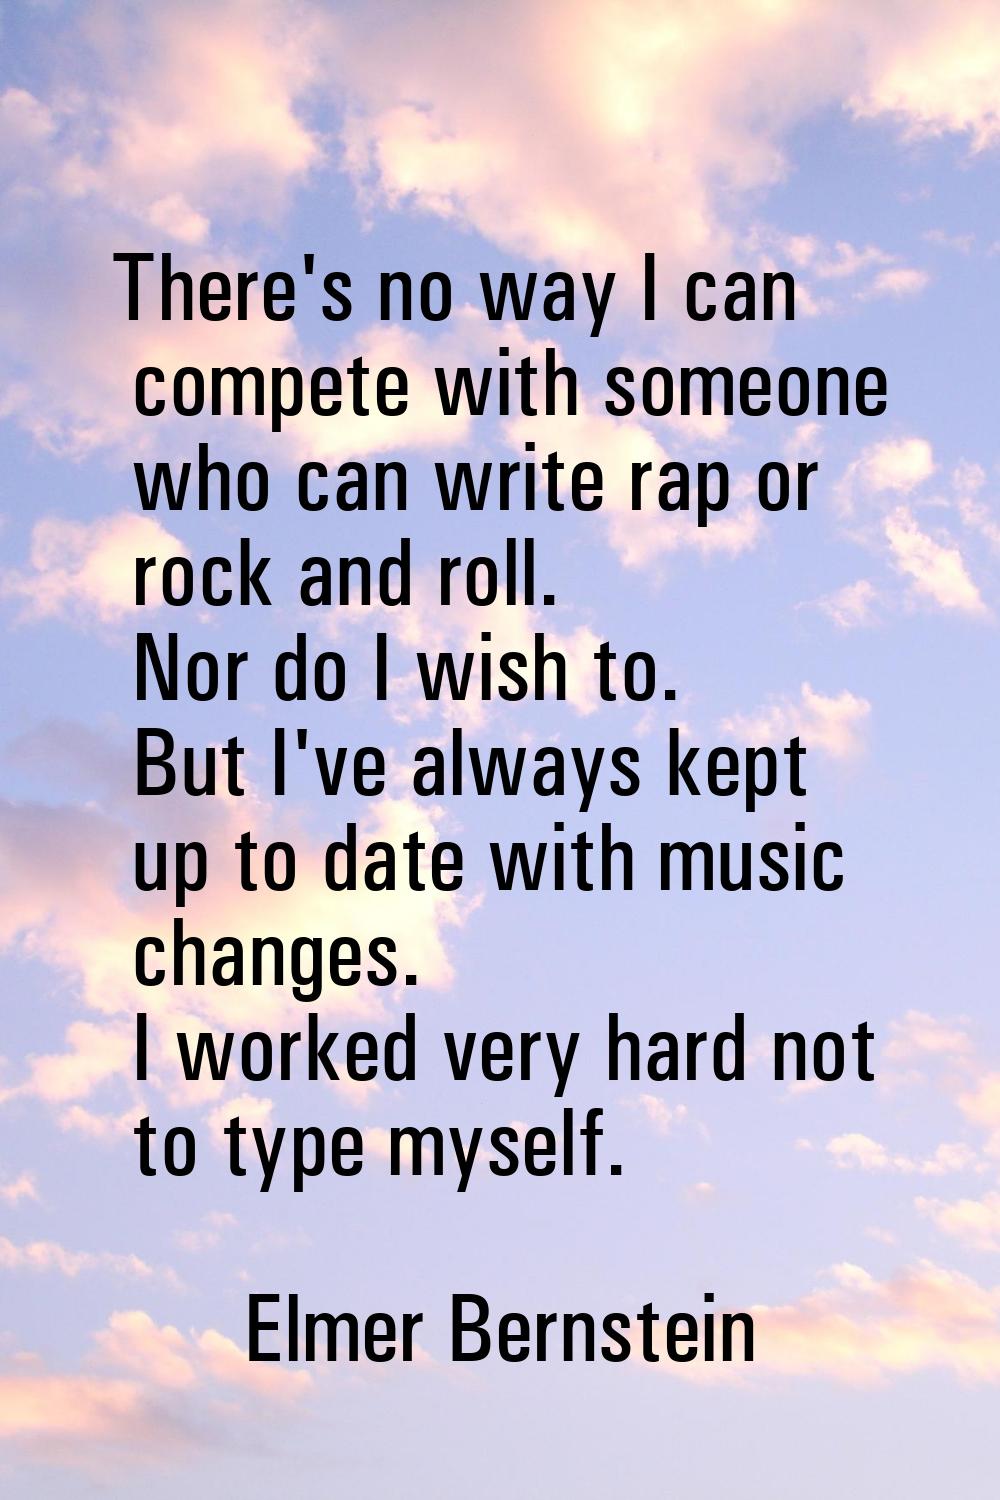 There's no way I can compete with someone who can write rap or rock and roll. Nor do I wish to. But